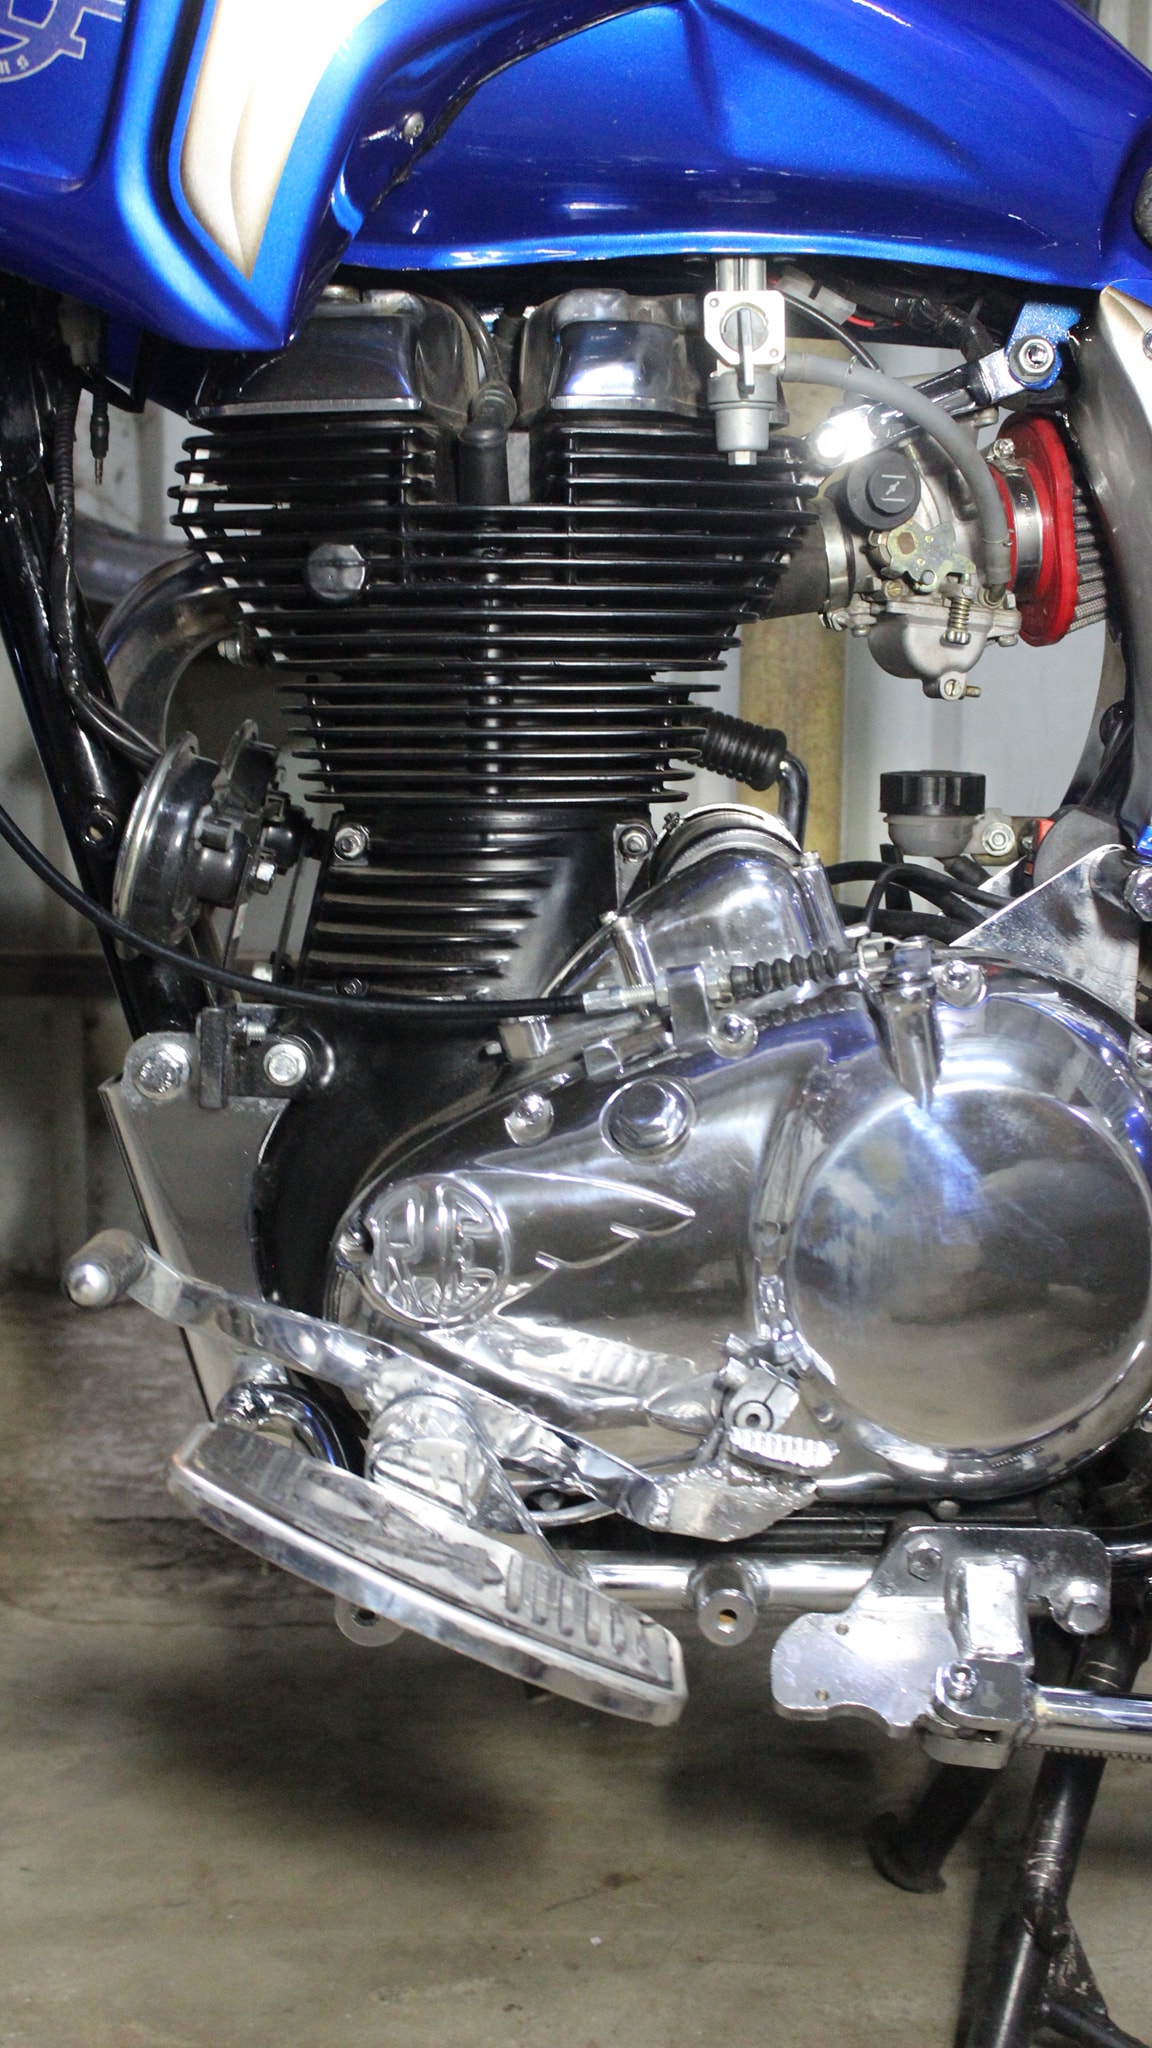 This Royal Enfield Bike is Equipped with Bluetooth Speakers & Dual Exhausts - left